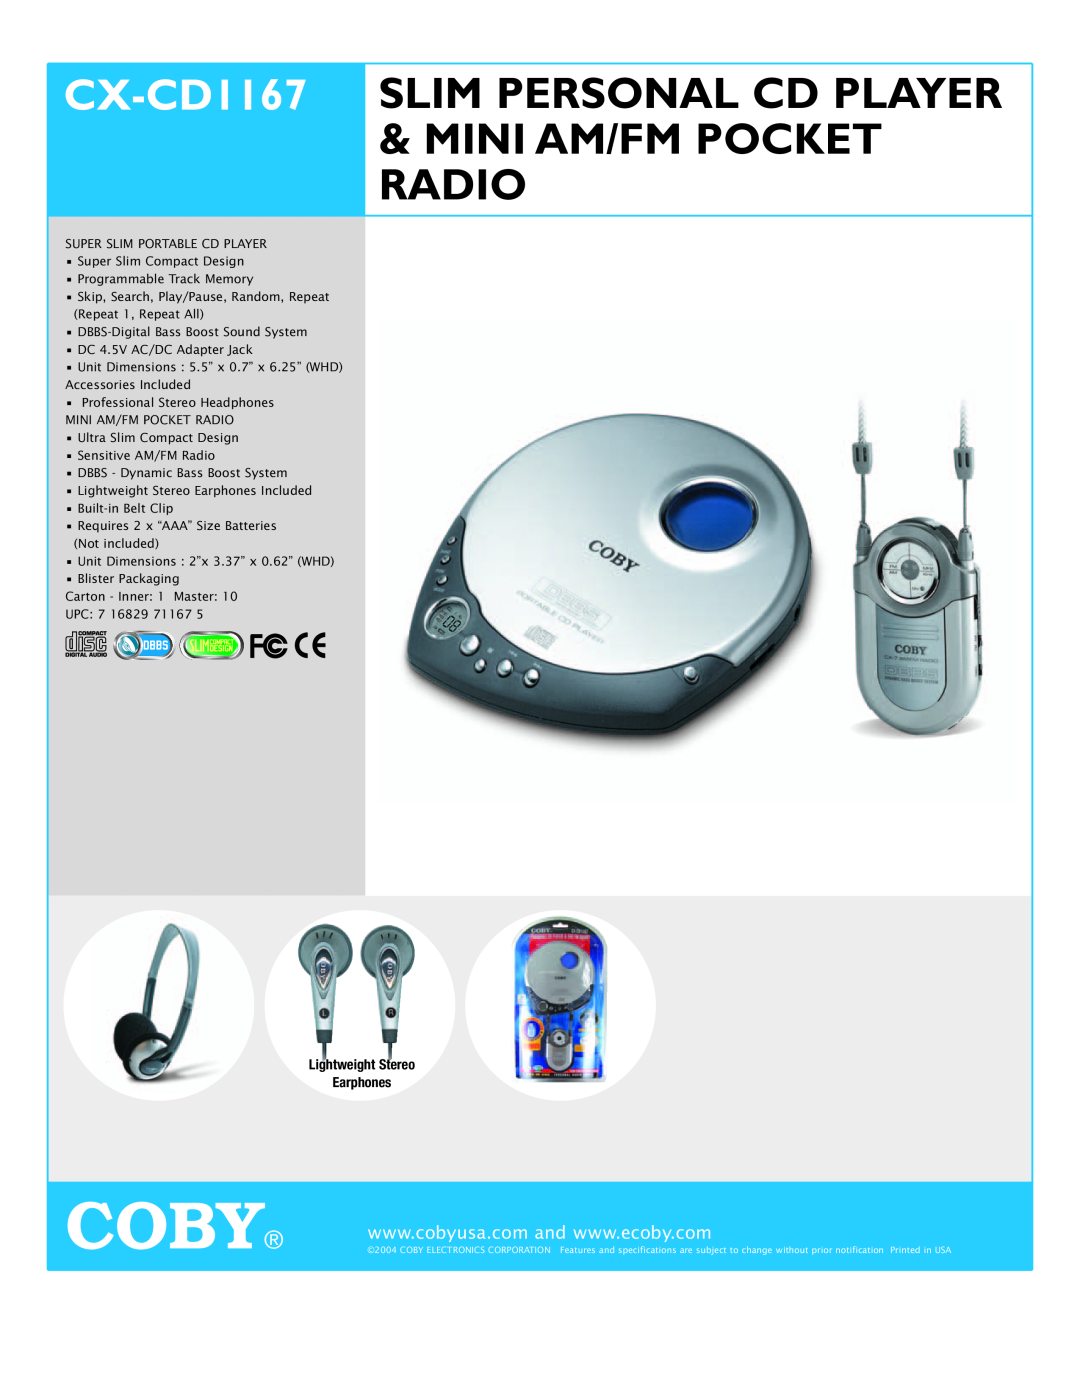 COBY electronic specifications Coby, CX-CD1167 SLIM PERSONAL CD PLAYER, Mini Am/Fm Pocket Radio 